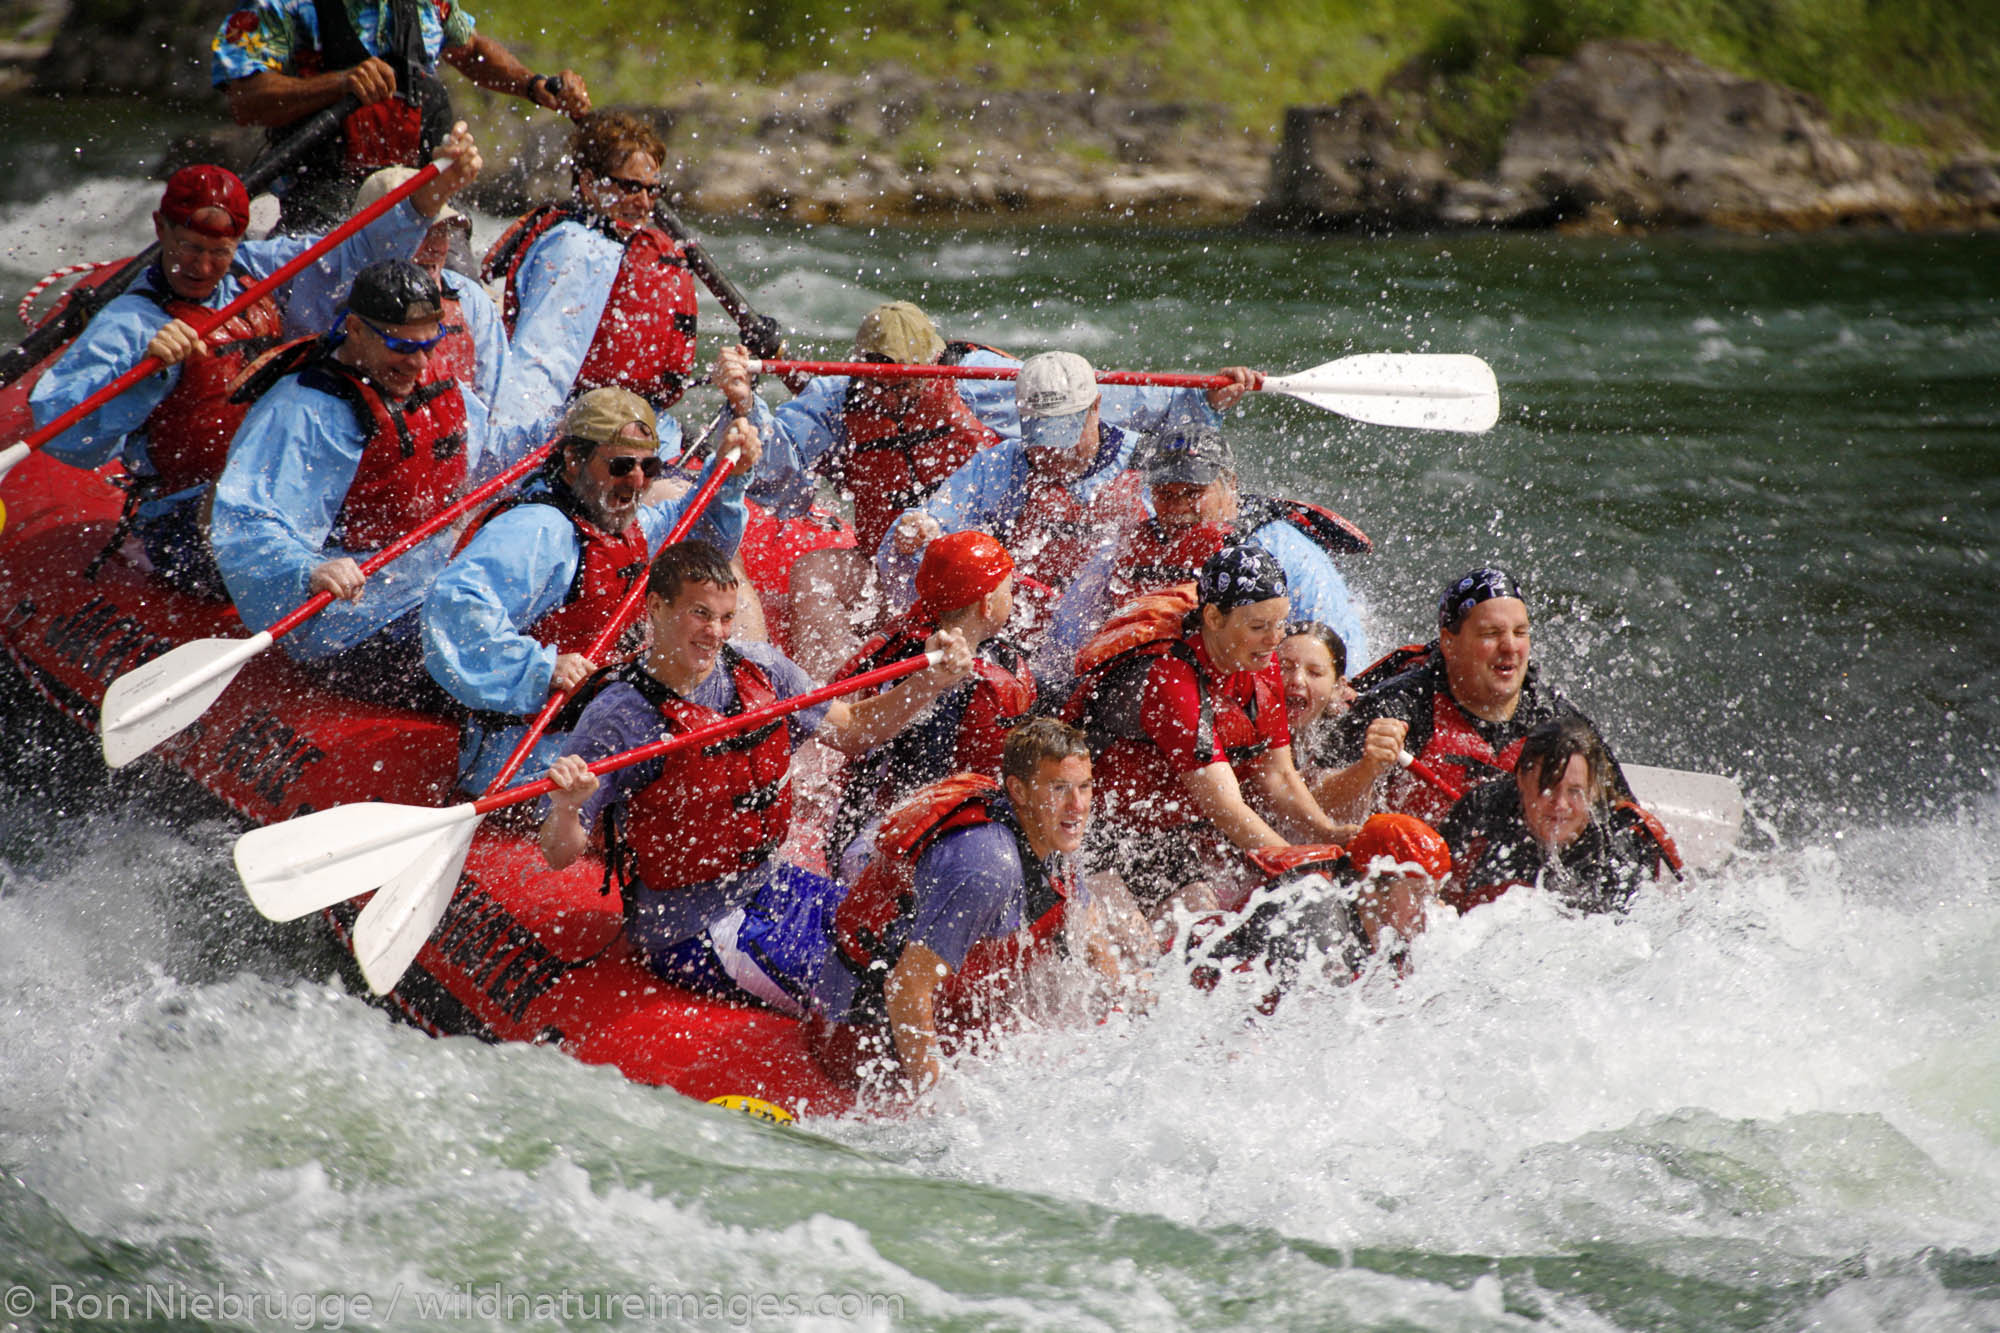 Whitewater rafting on the Snake River, near Jackson, Wyoming.